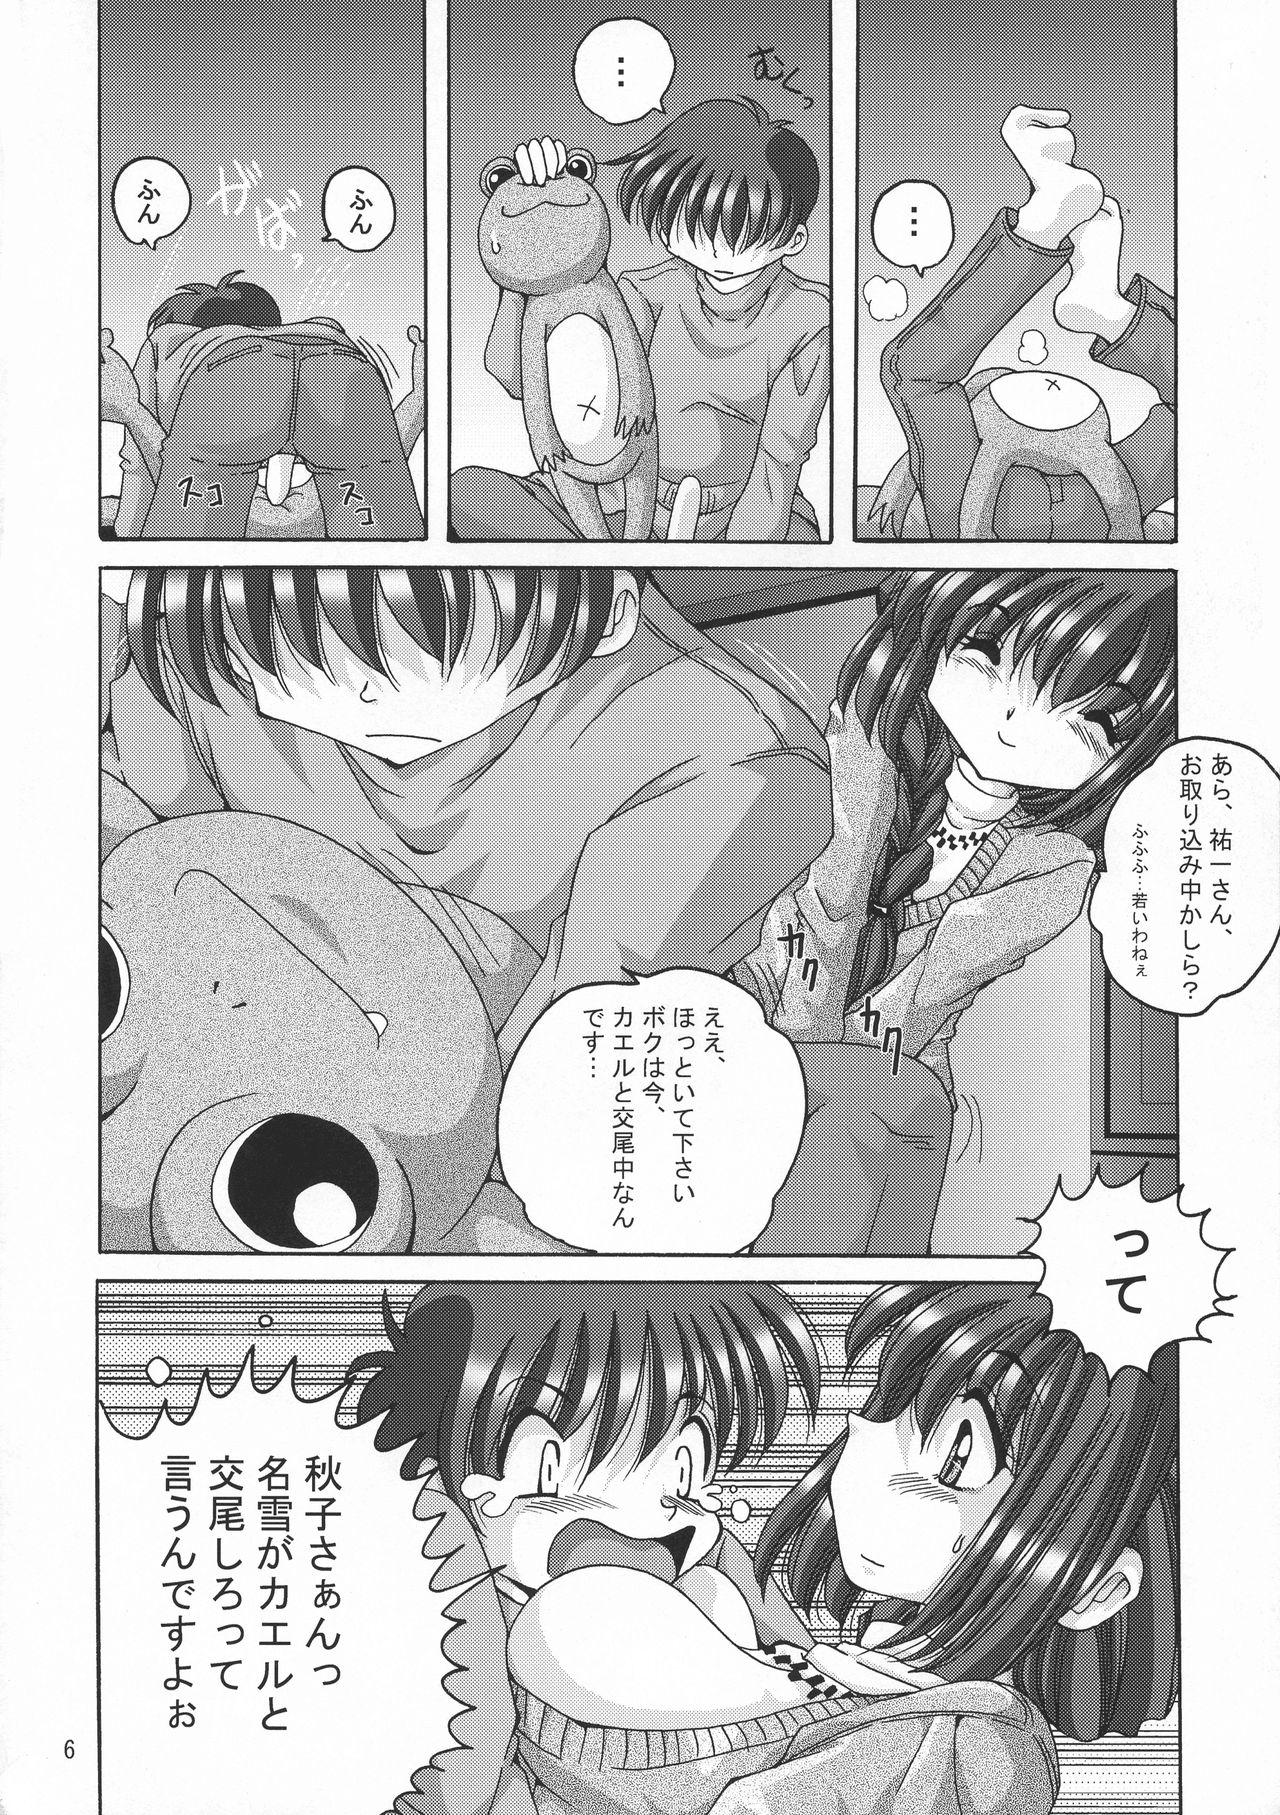 Cute V-TIC 37 - Kanon Chubby - Page 6